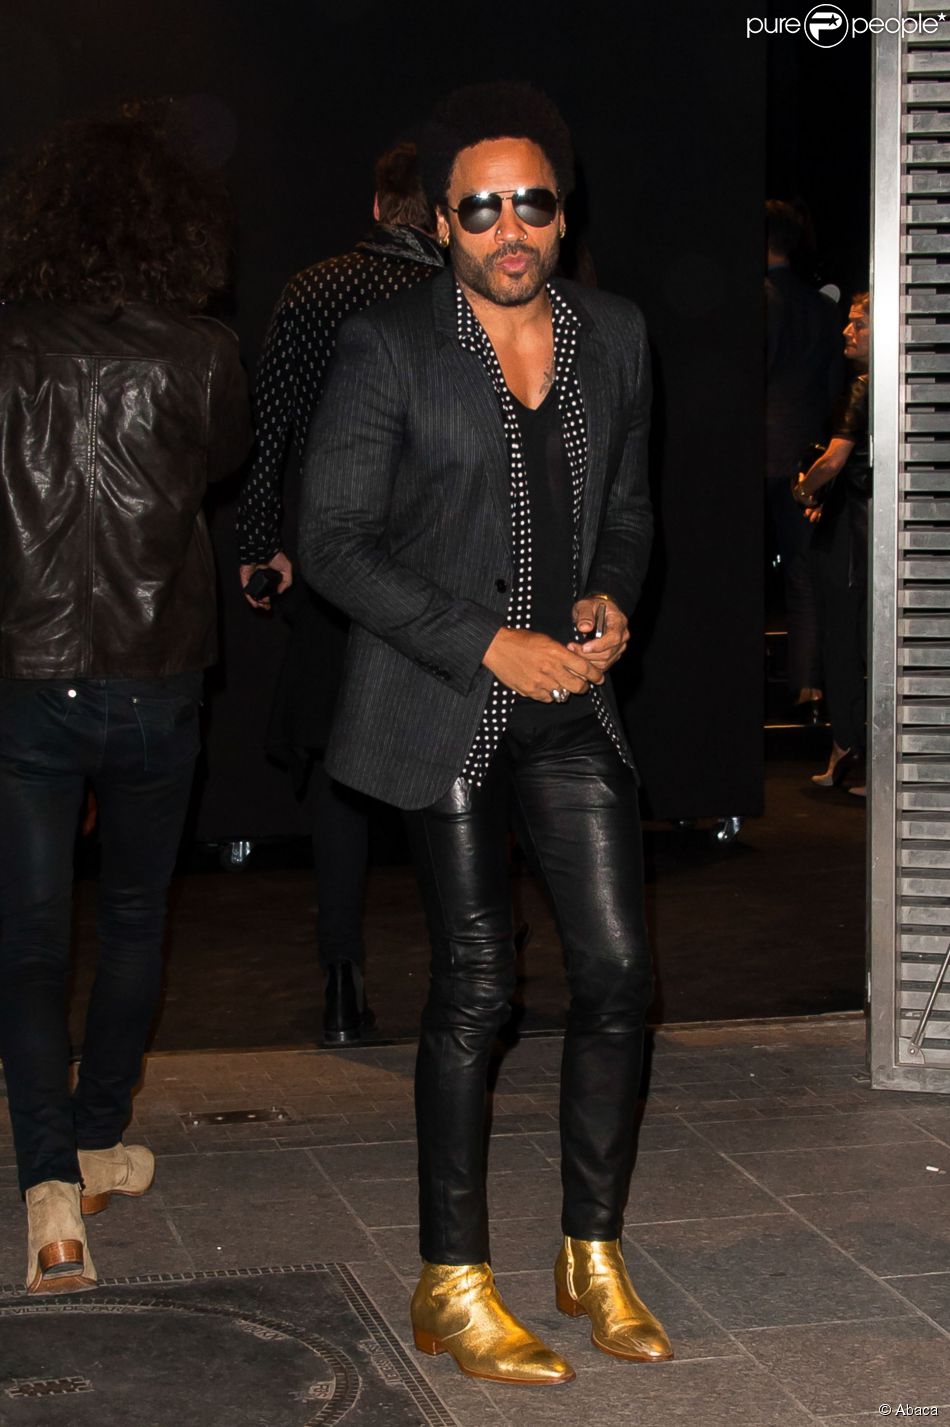 Lenny Kravitz attending the Saint Laurent&#039;s Spring-Summer 2014/2015 Ready-To-Wear collection show held at the Carreau du Temple in Paris, France, on September 29, 2014. Photo by Nicolas Genin/ABACAPRESS.COM30/09/2014 - Paris